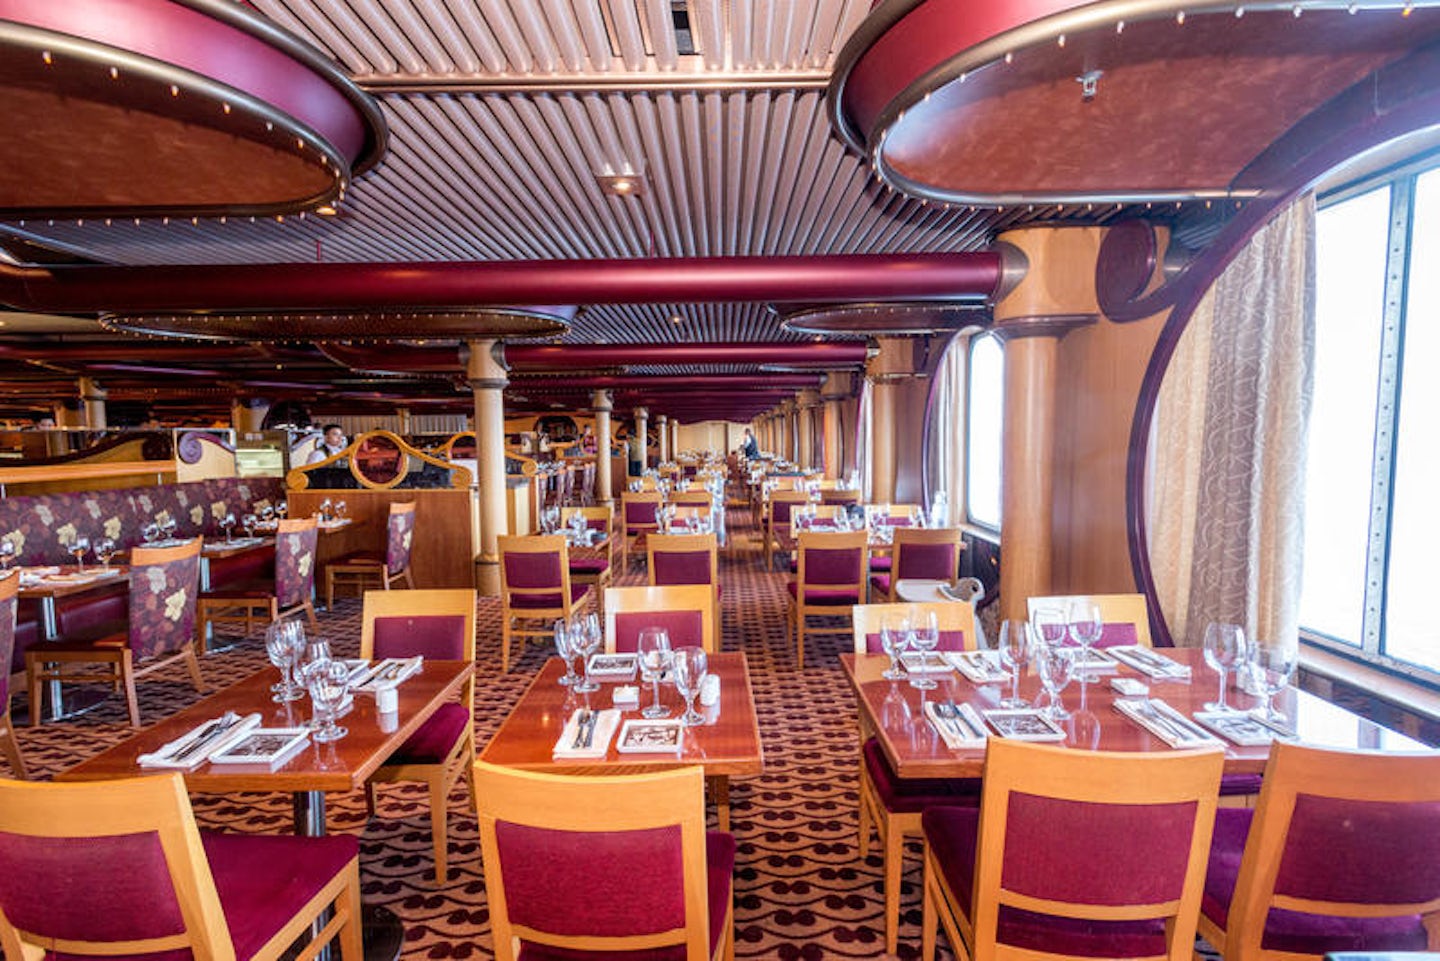 Elation Dining Room on Carnival Paradise